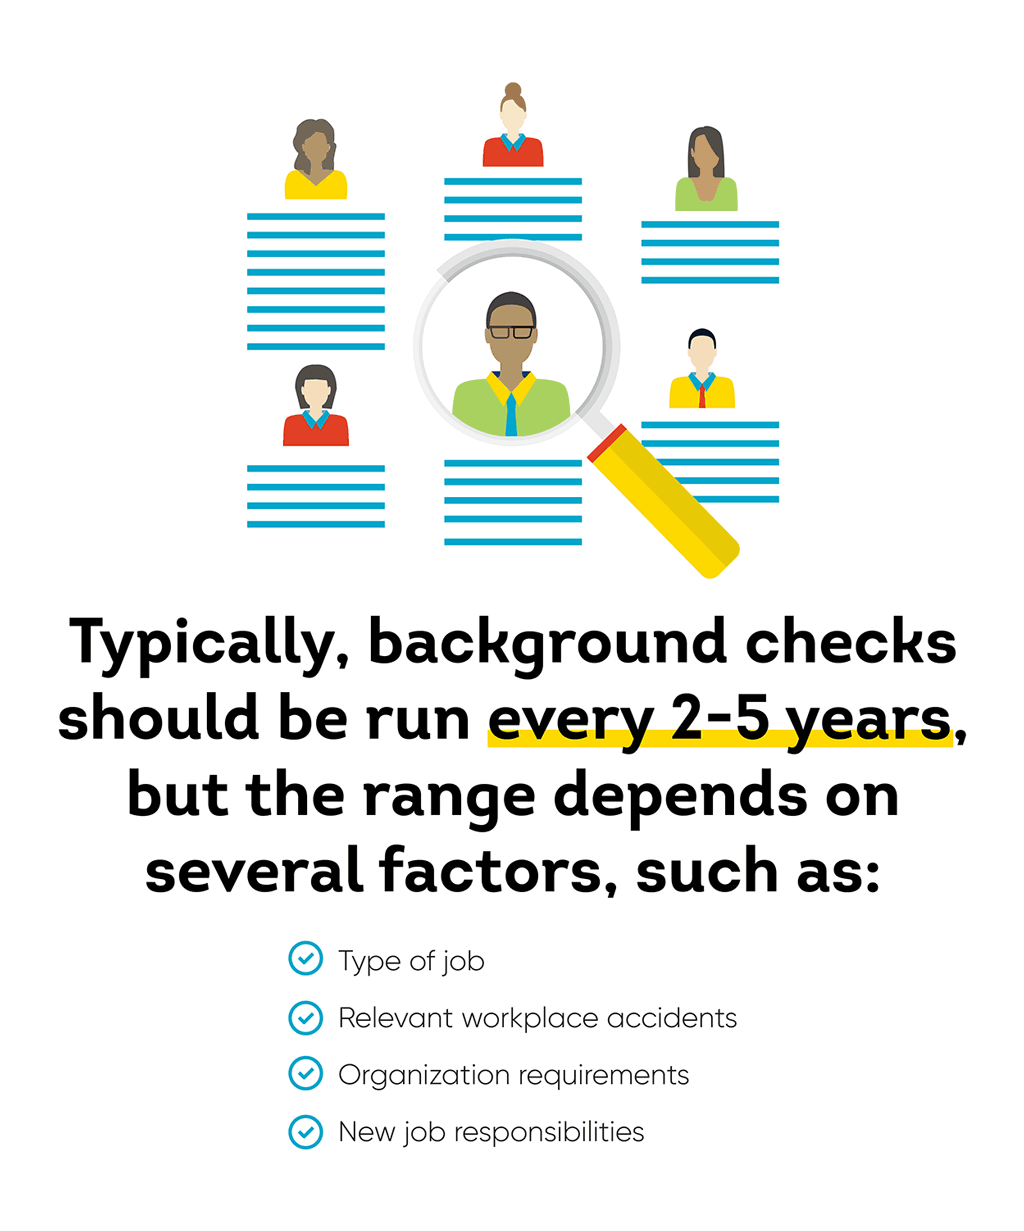 Typically, background checks should be run every 2-5 years, but the range depends on several factors, such as type of job, relevant workplace accidents, organization requirements, and new job responsibilities.